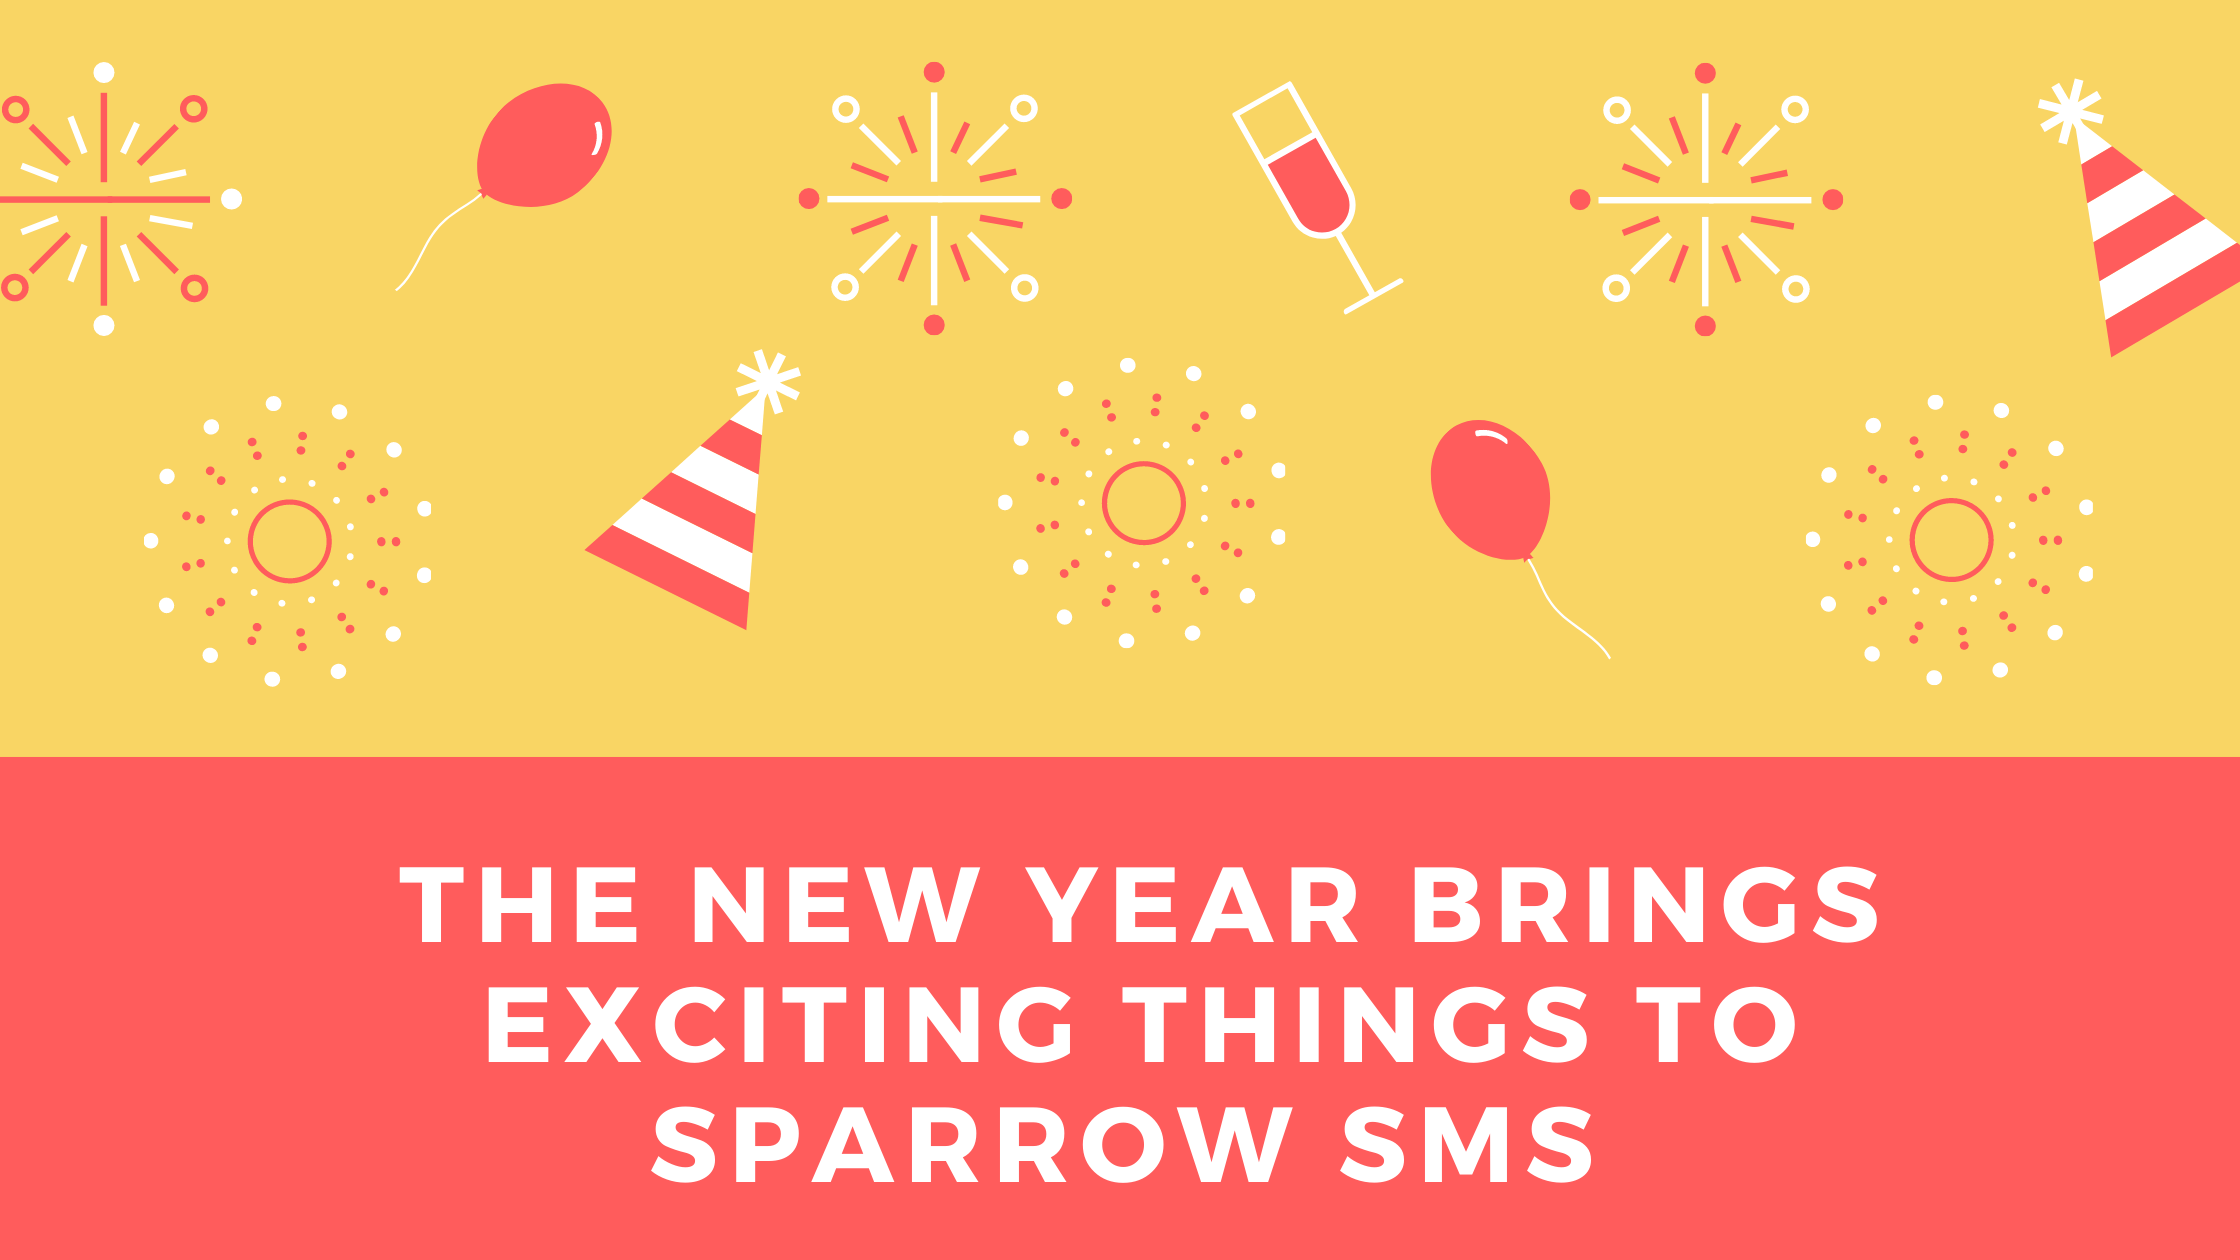 The New Year Brings Exciting Things to Sparrow SMS